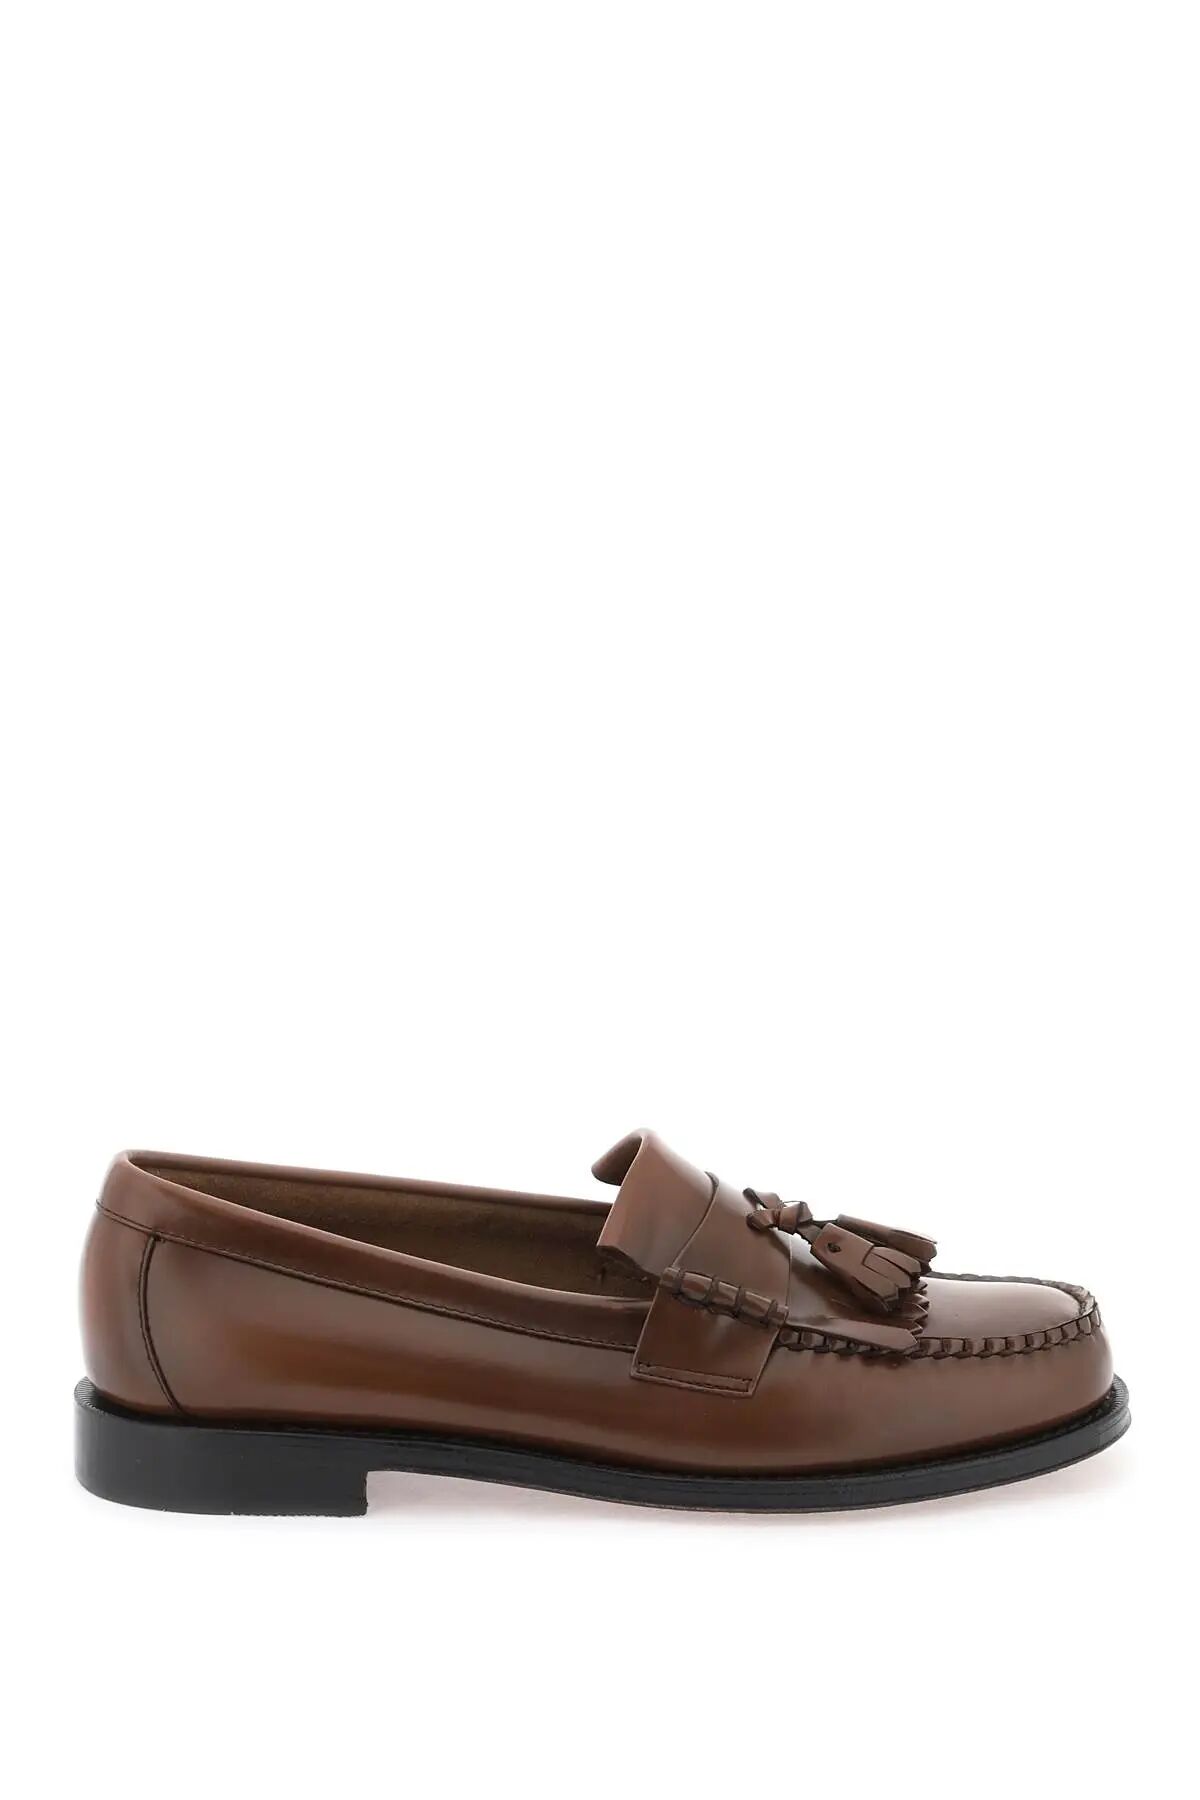 G.H. BASS Esther Kiltie Weejuns loafers  - Brown - male - Size: 42,5